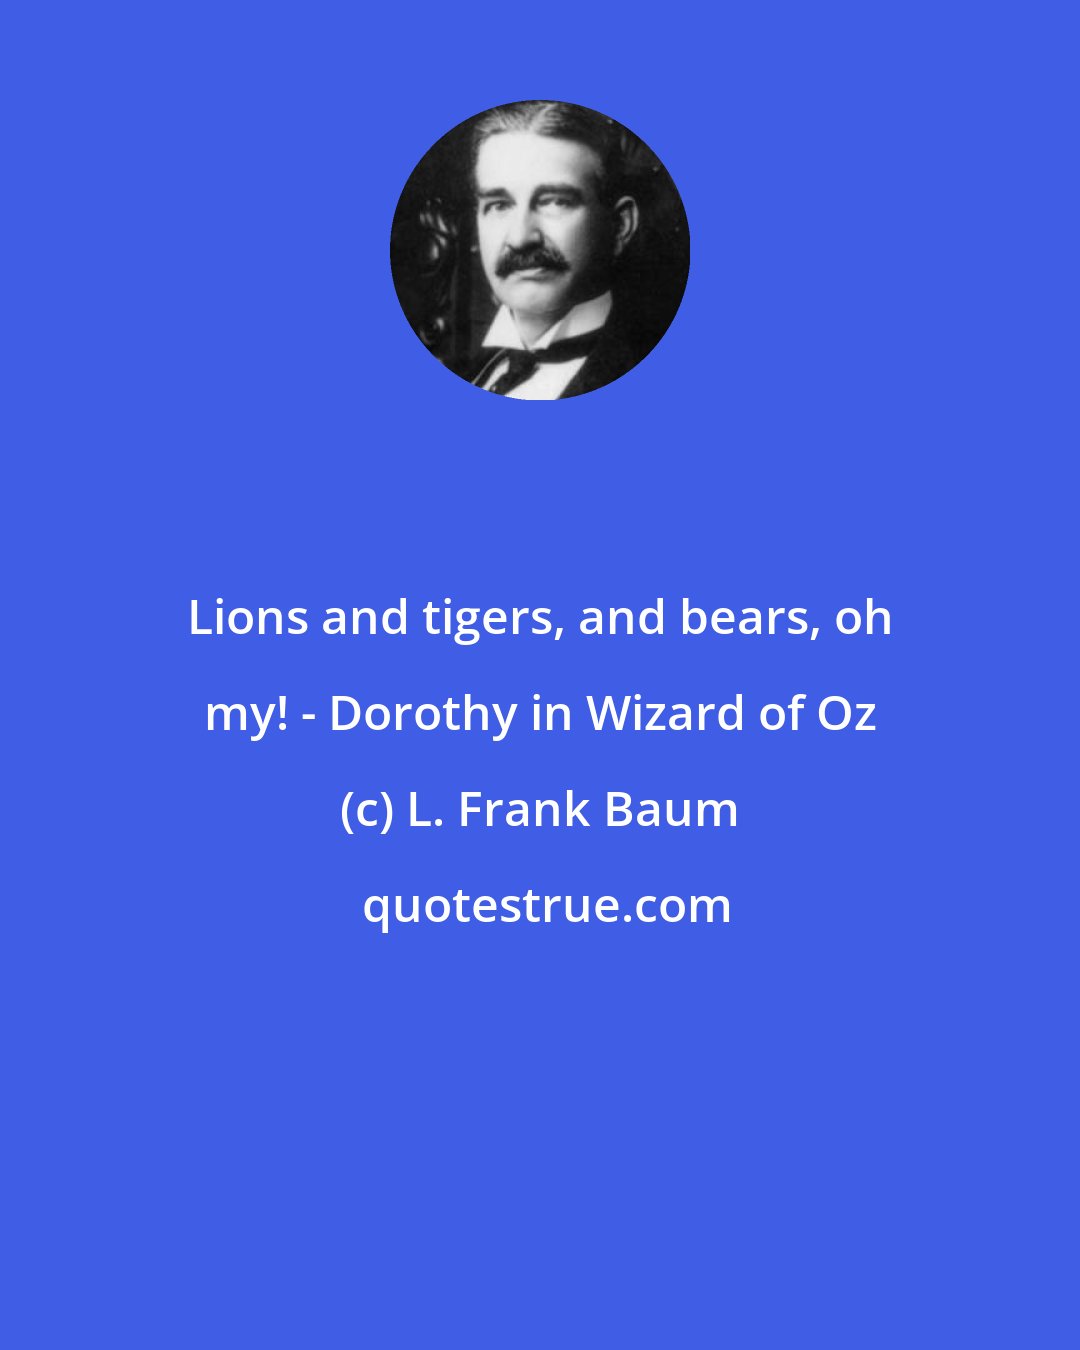 L. Frank Baum: Lions and tigers, and bears, oh my! - Dorothy in Wizard of Oz